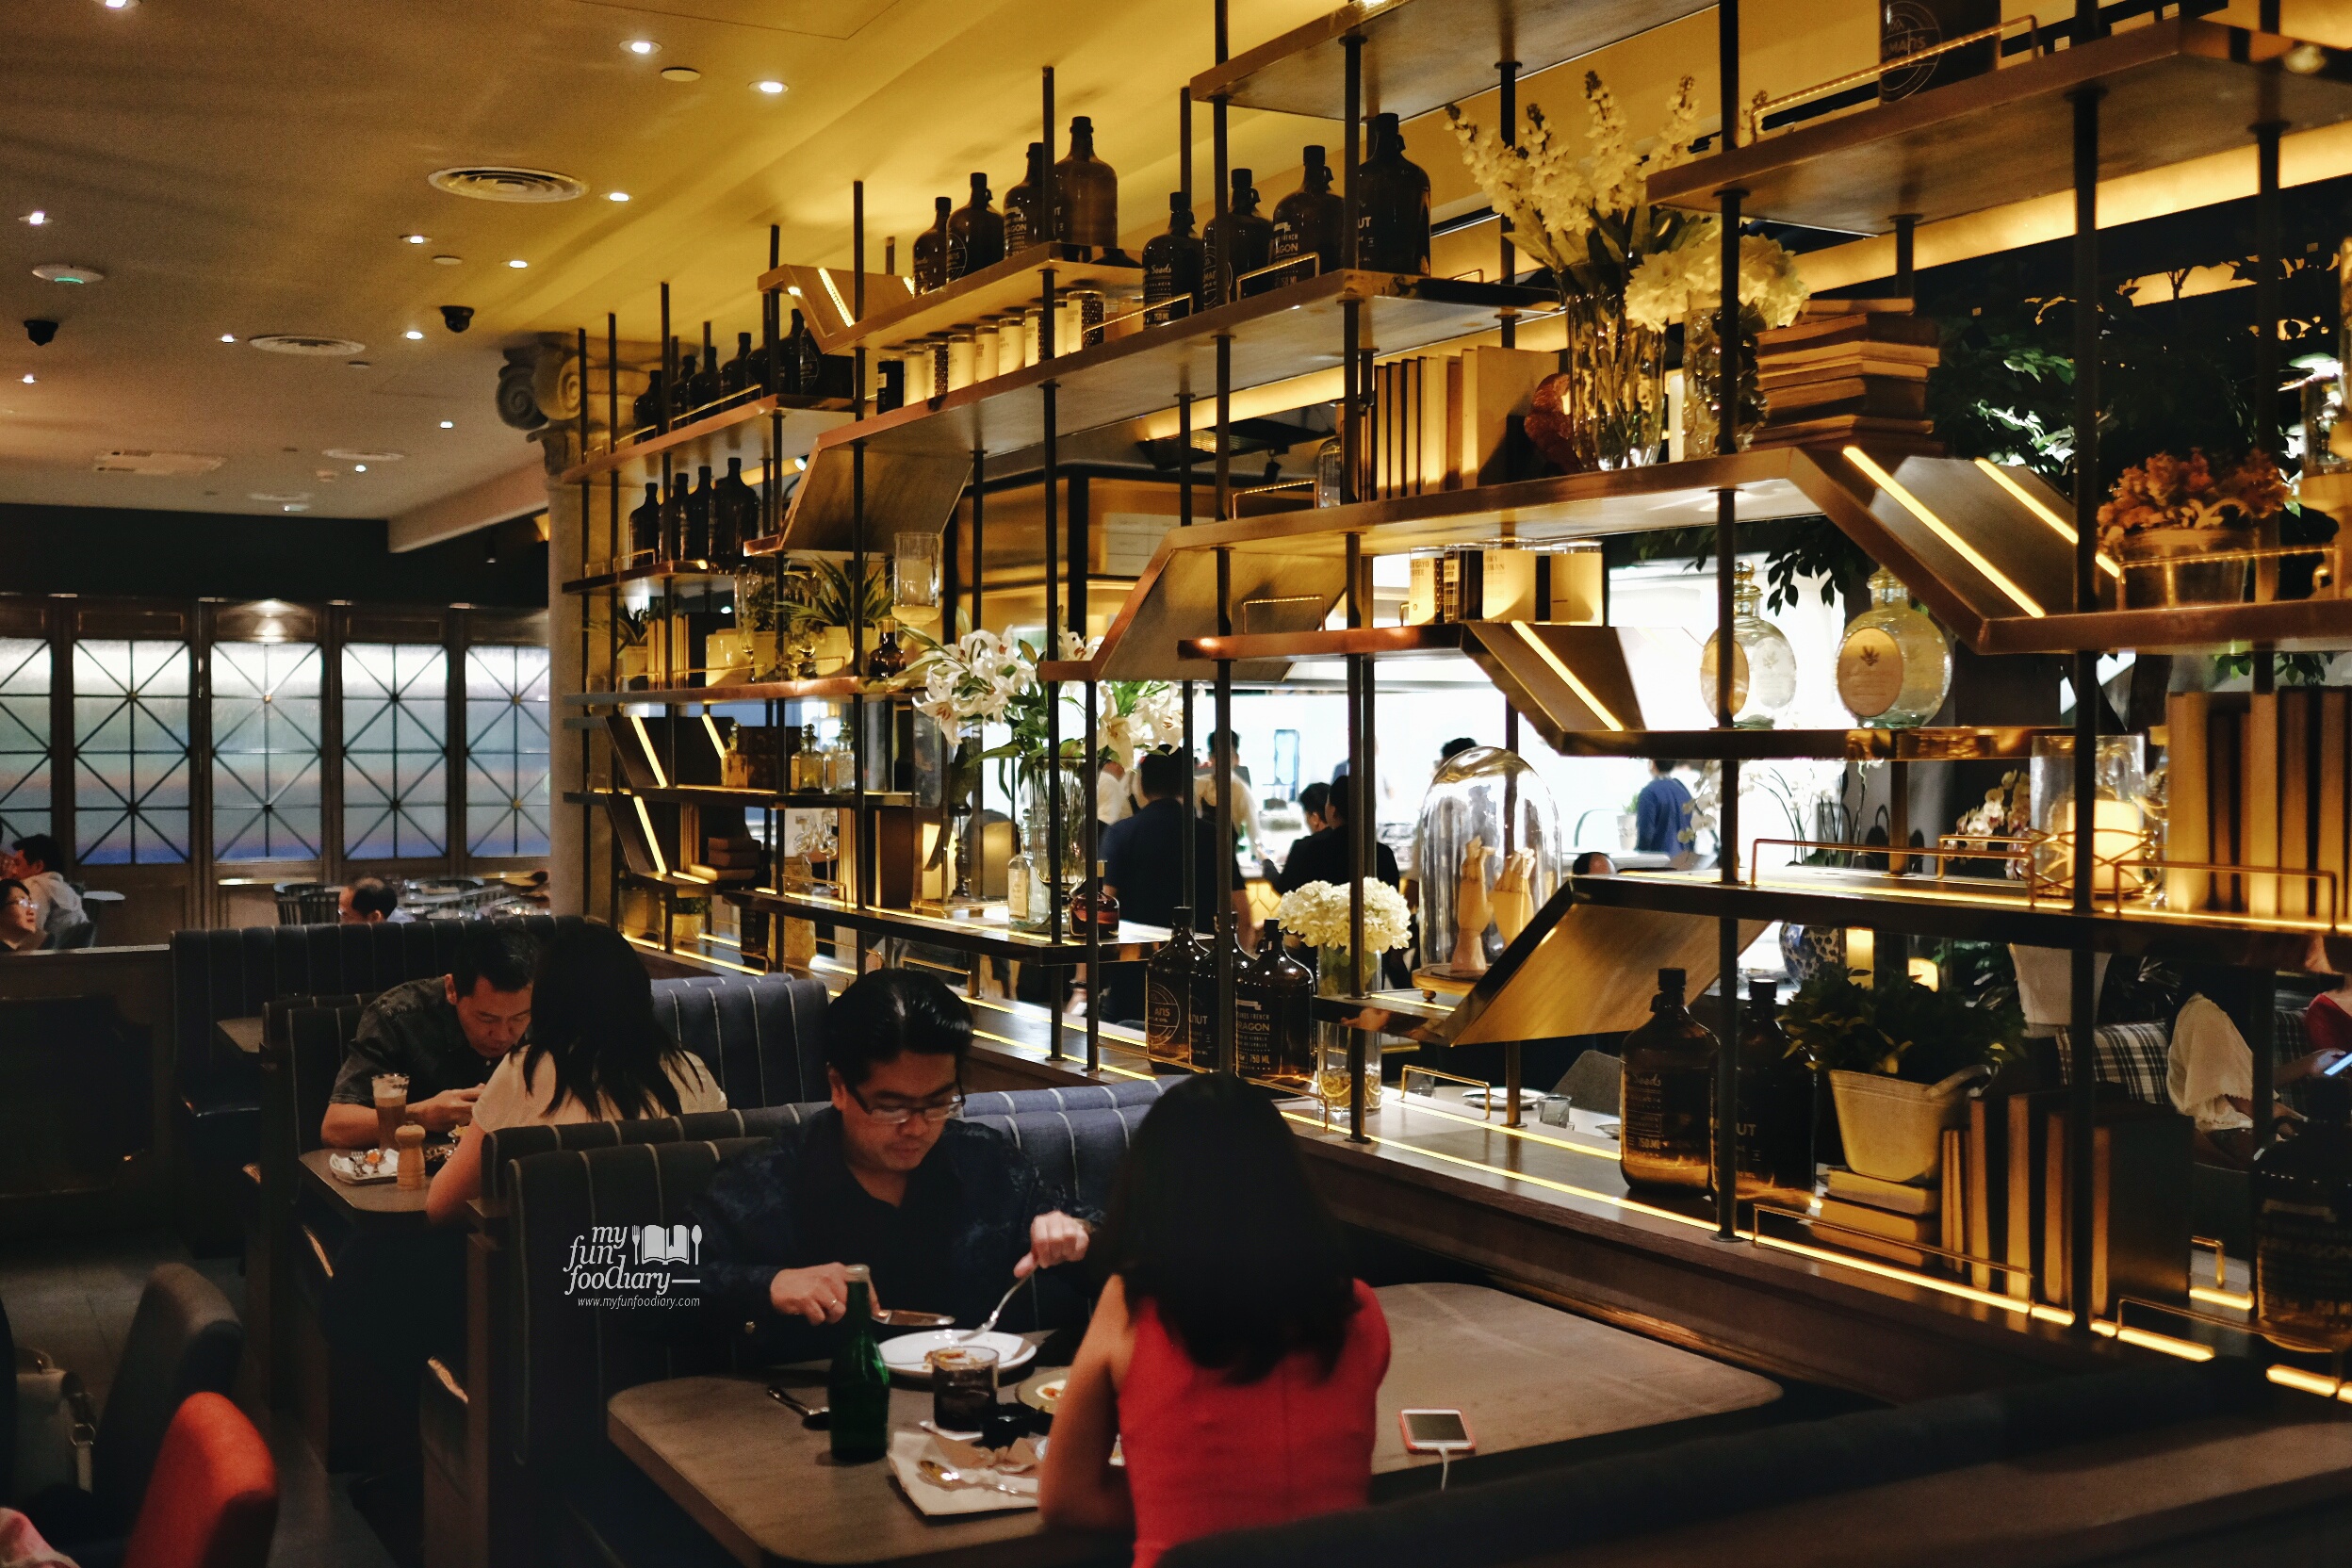 Indoor ambiance at Socieaty Plaza Indonesia by Myfunfoodiary